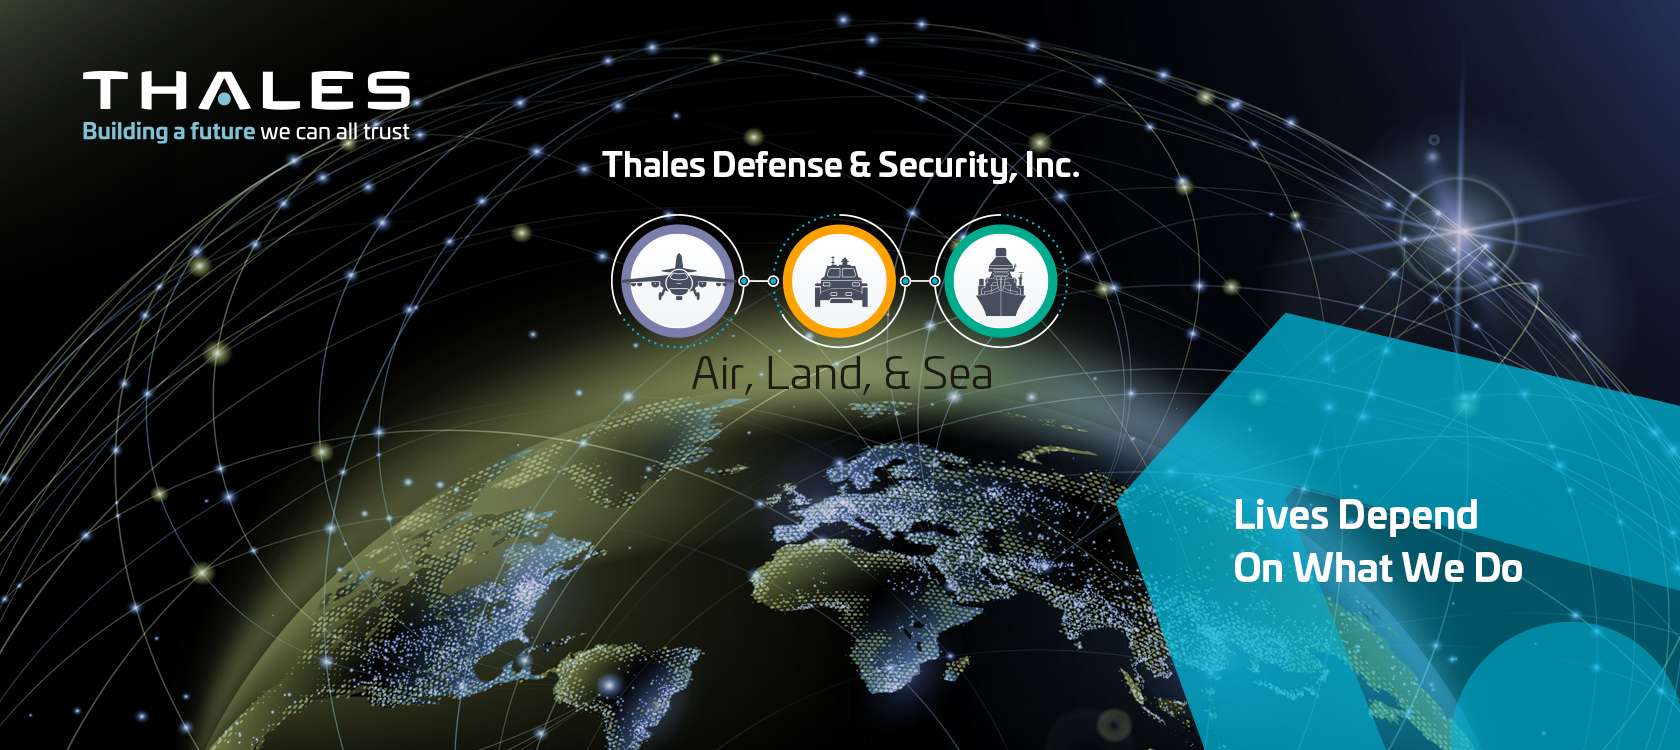 Thales Defense and Security Inc